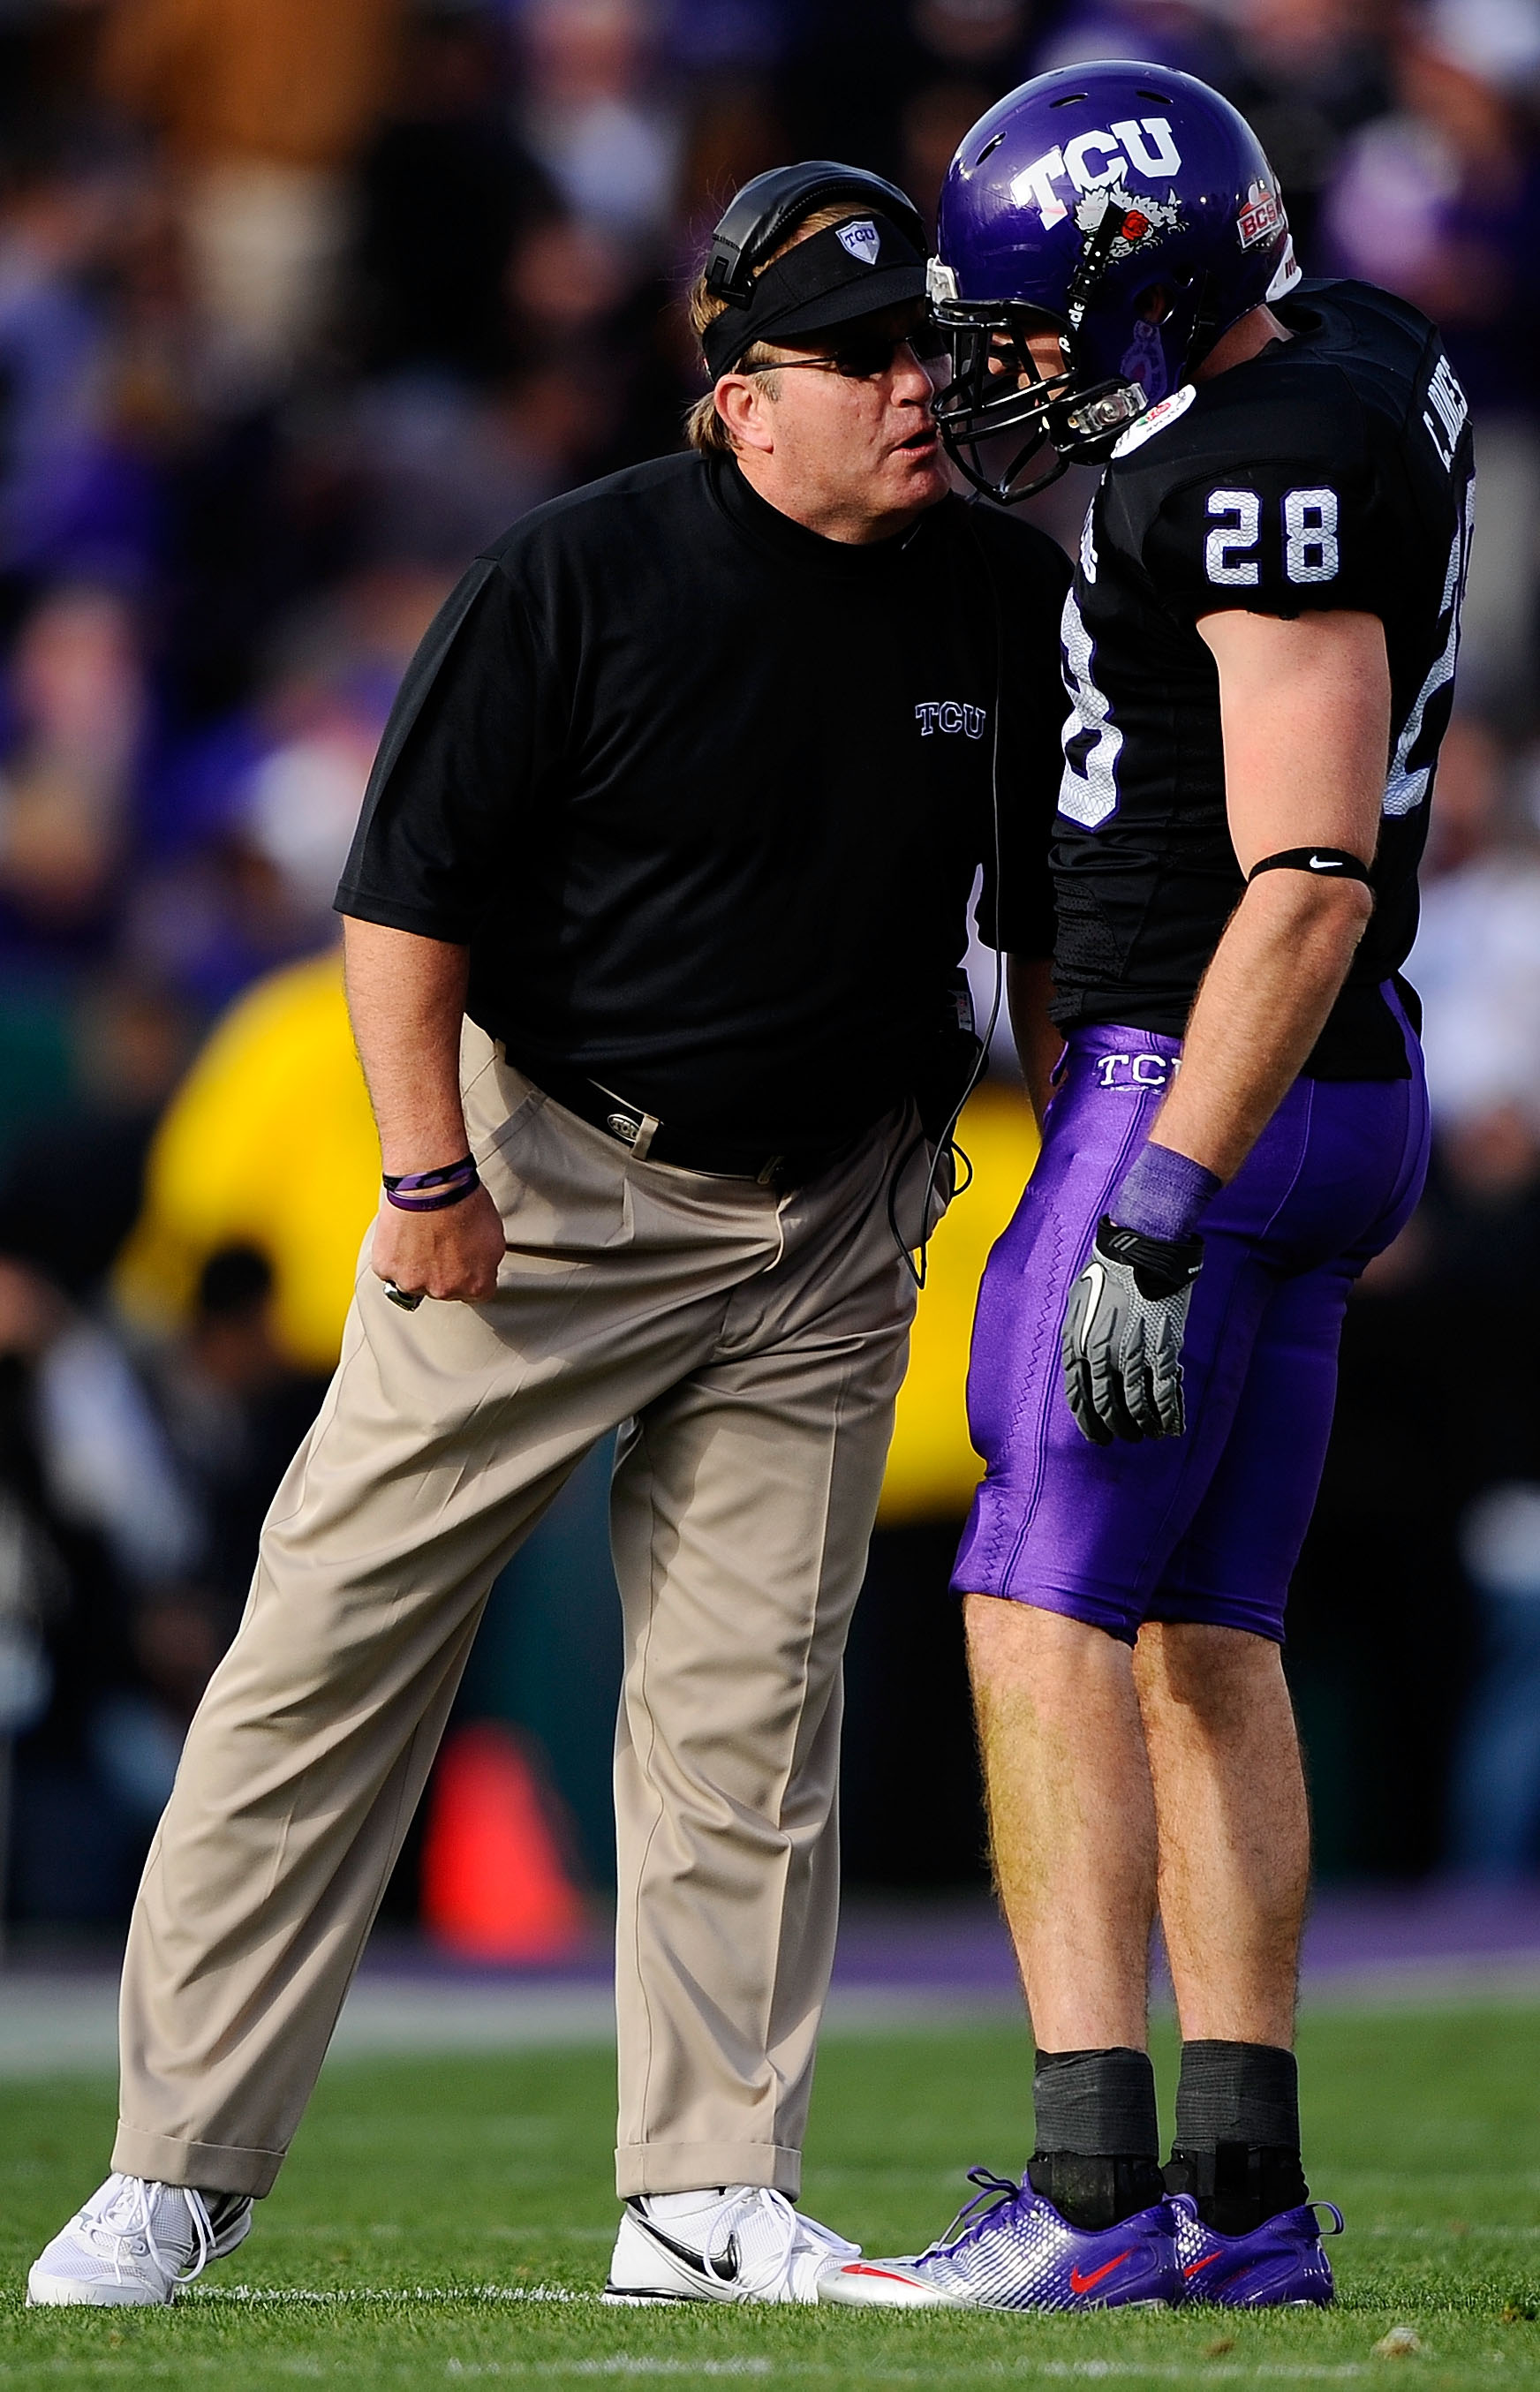 PASADENA, CA - JANUARY 01:  Head coach Gary Patterson of the TCU Horned Frogs talks with safety Colin Jones #28 on the field during their game against the Wisconsin Badgers in the 97th Rose Bowl game on January 1, 2011 in Pasadena, California.  (Photo by